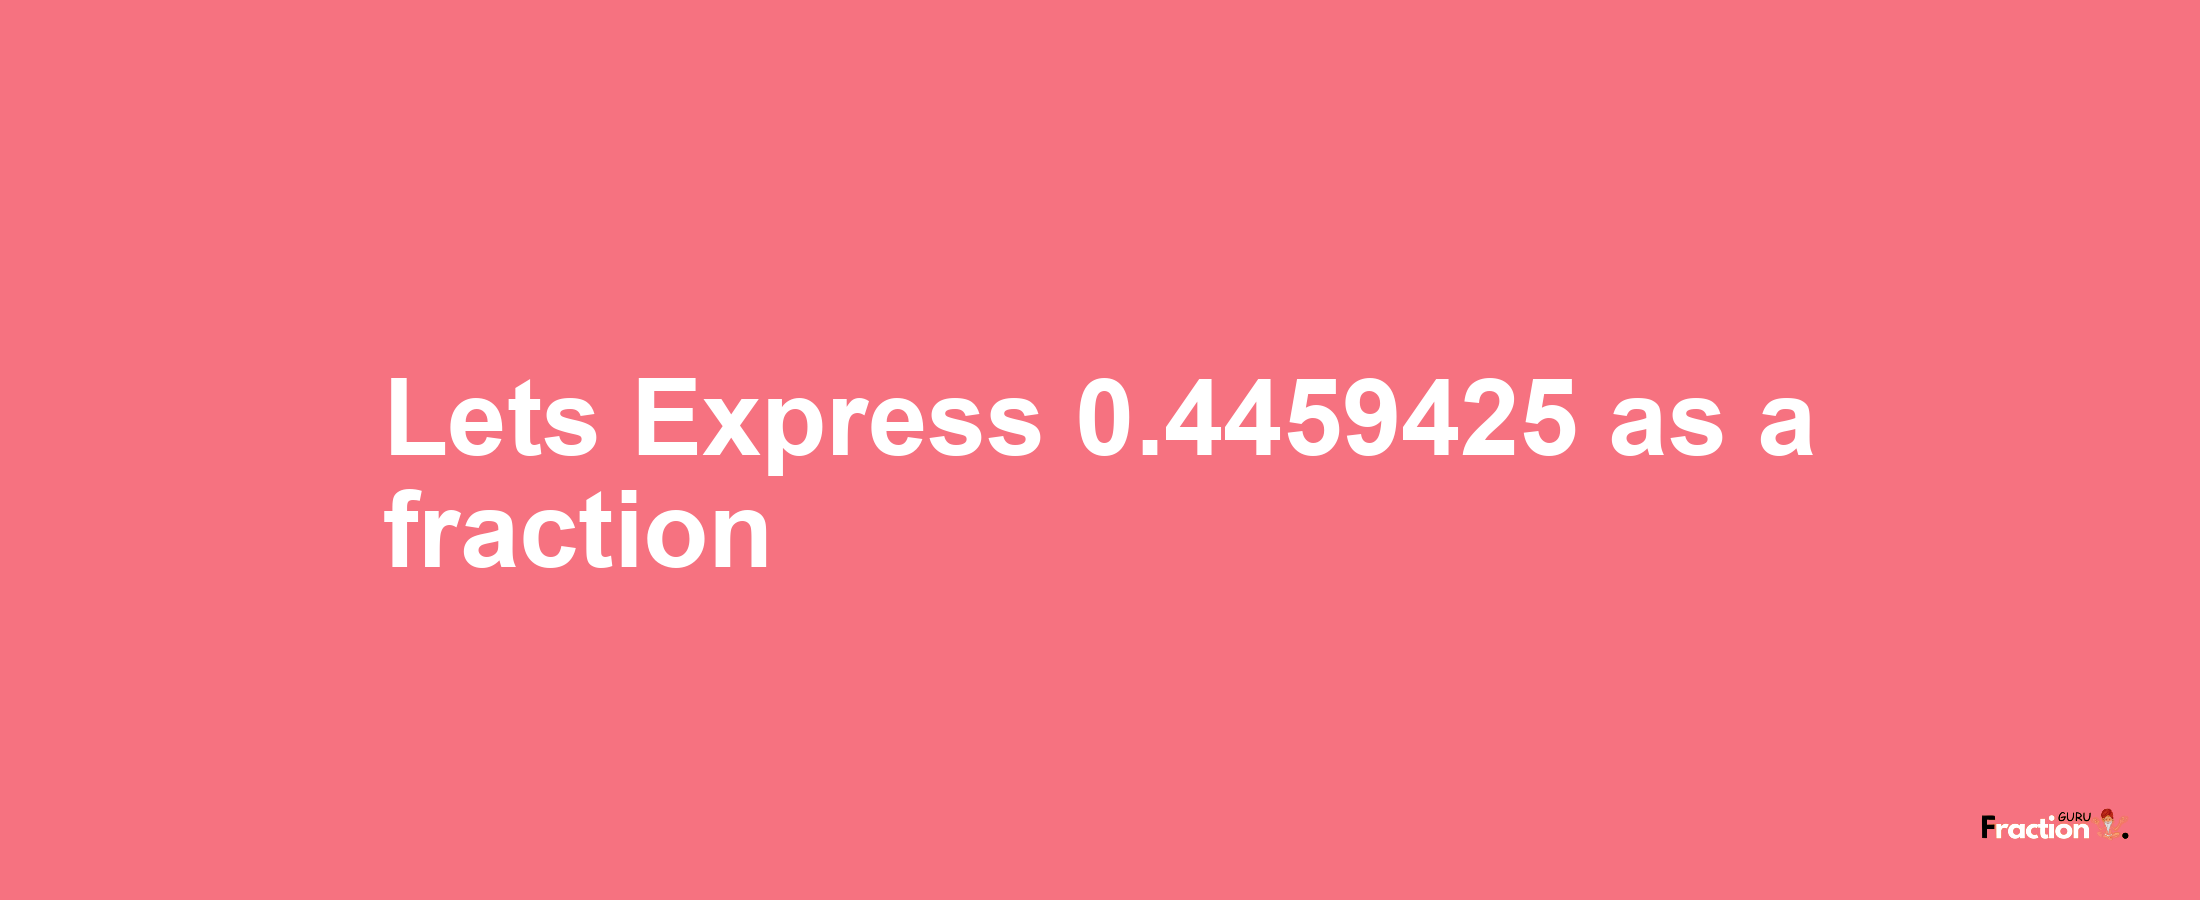 Lets Express 0.4459425 as afraction